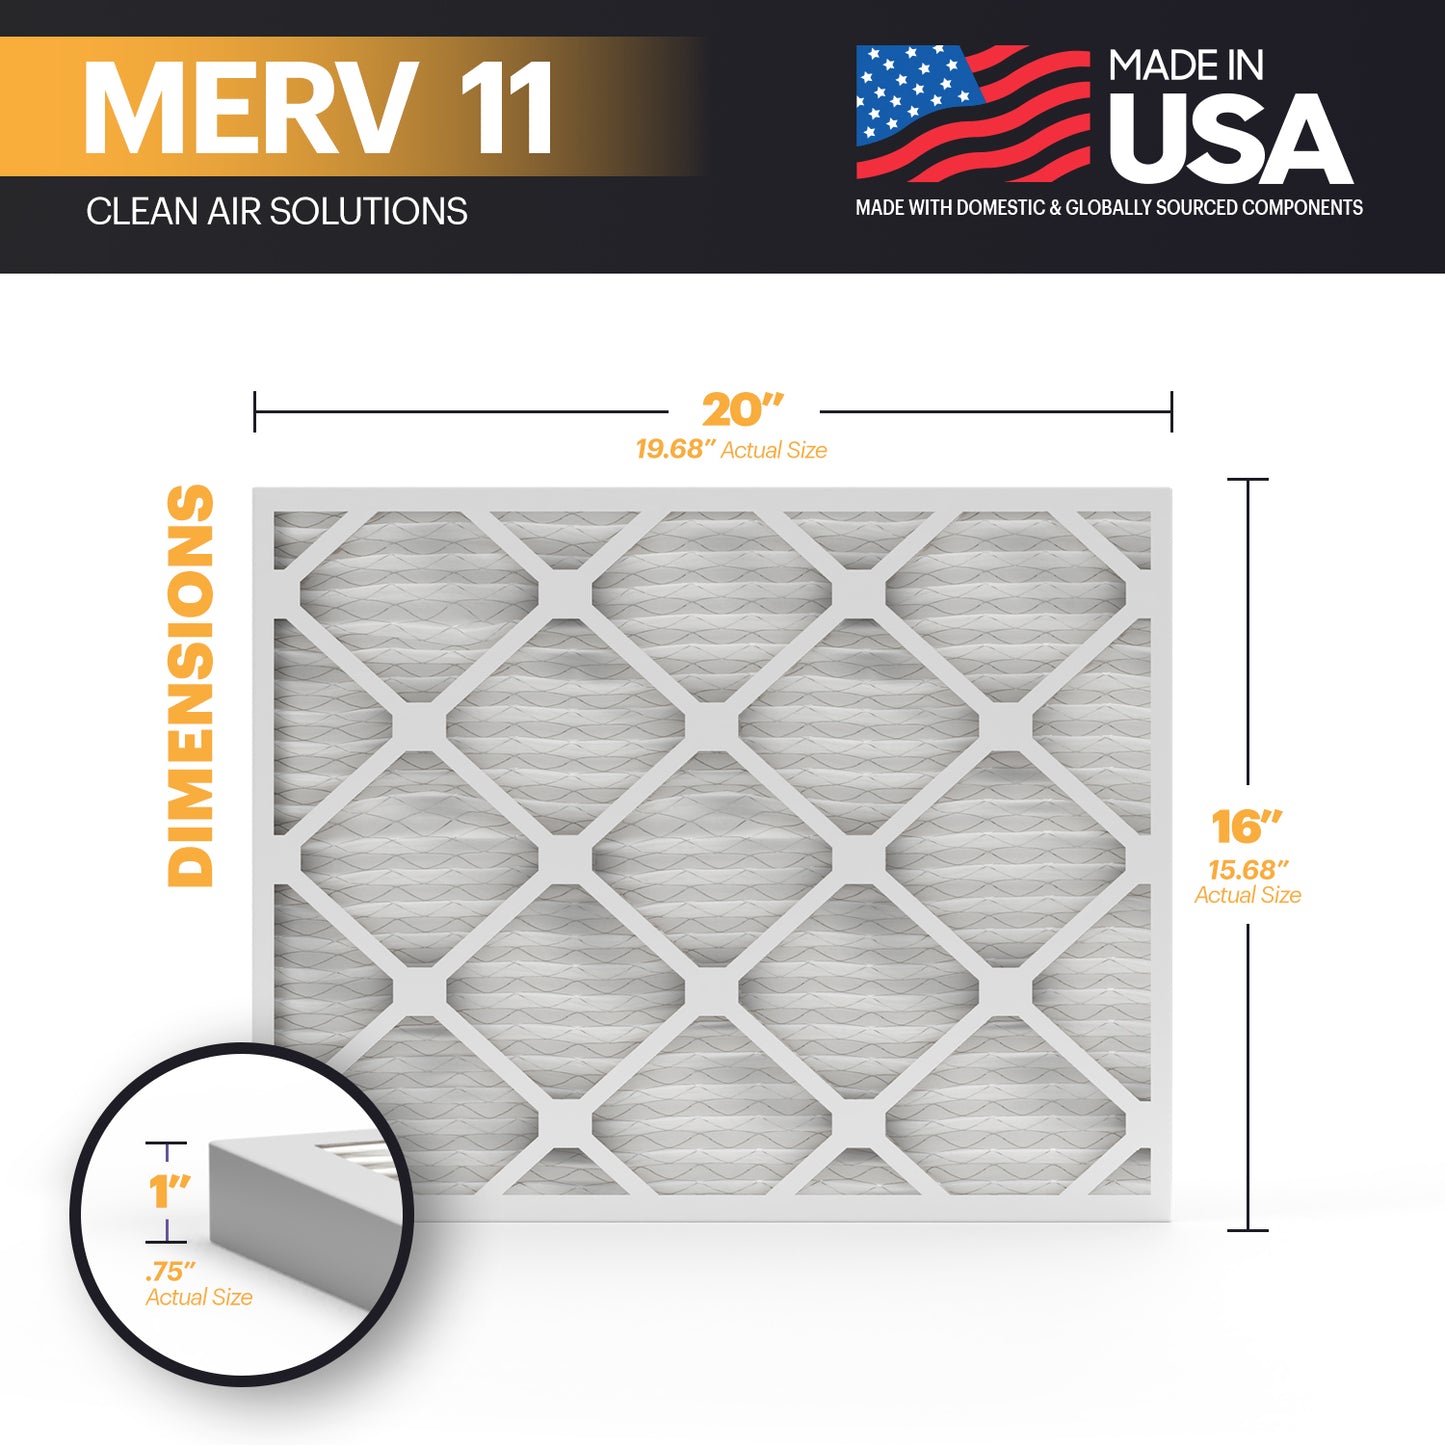 BNX TruFilter 16x20x1 Air Filter MERV 11 (6-Pack) - MADE IN USA - Allergen Defense Electrostatic Pleated Air Conditioner HVAC AC Furnace Filters for Allergies, Dust, Pet, Smoke, Allergy MPR 1200 FPR 7